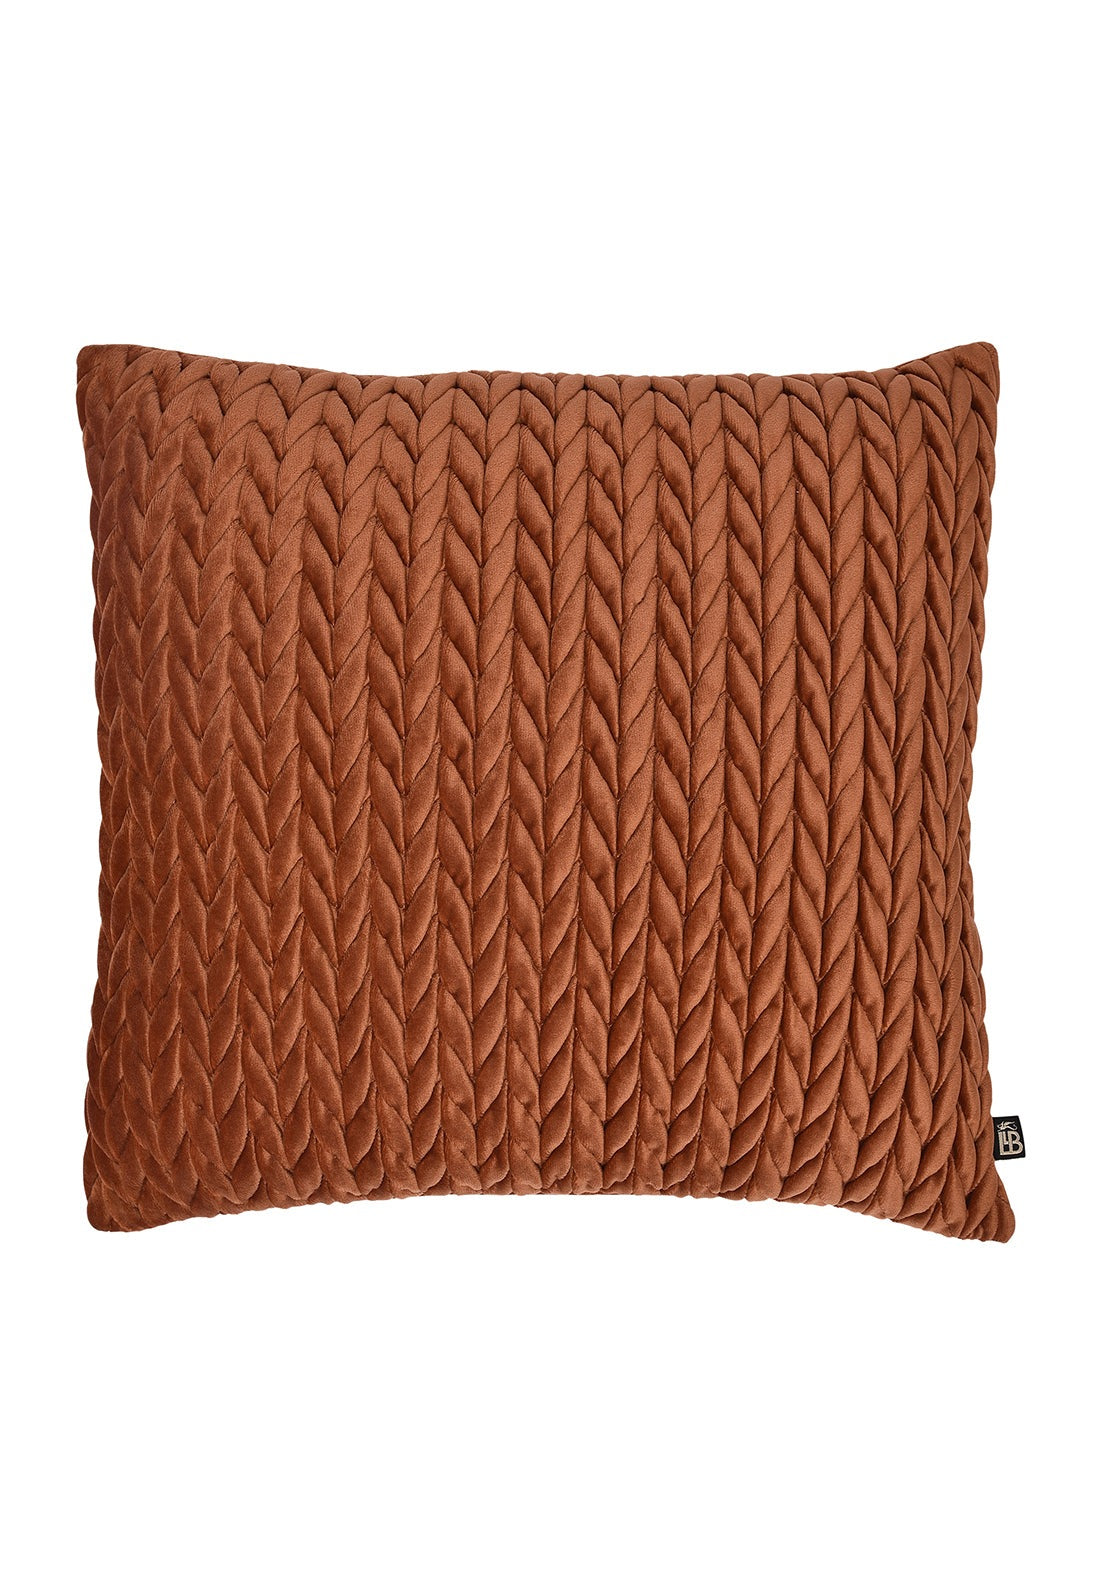 The Home Luxury Collection Amour Cushion - Bronze 1 Shaws Department Stores